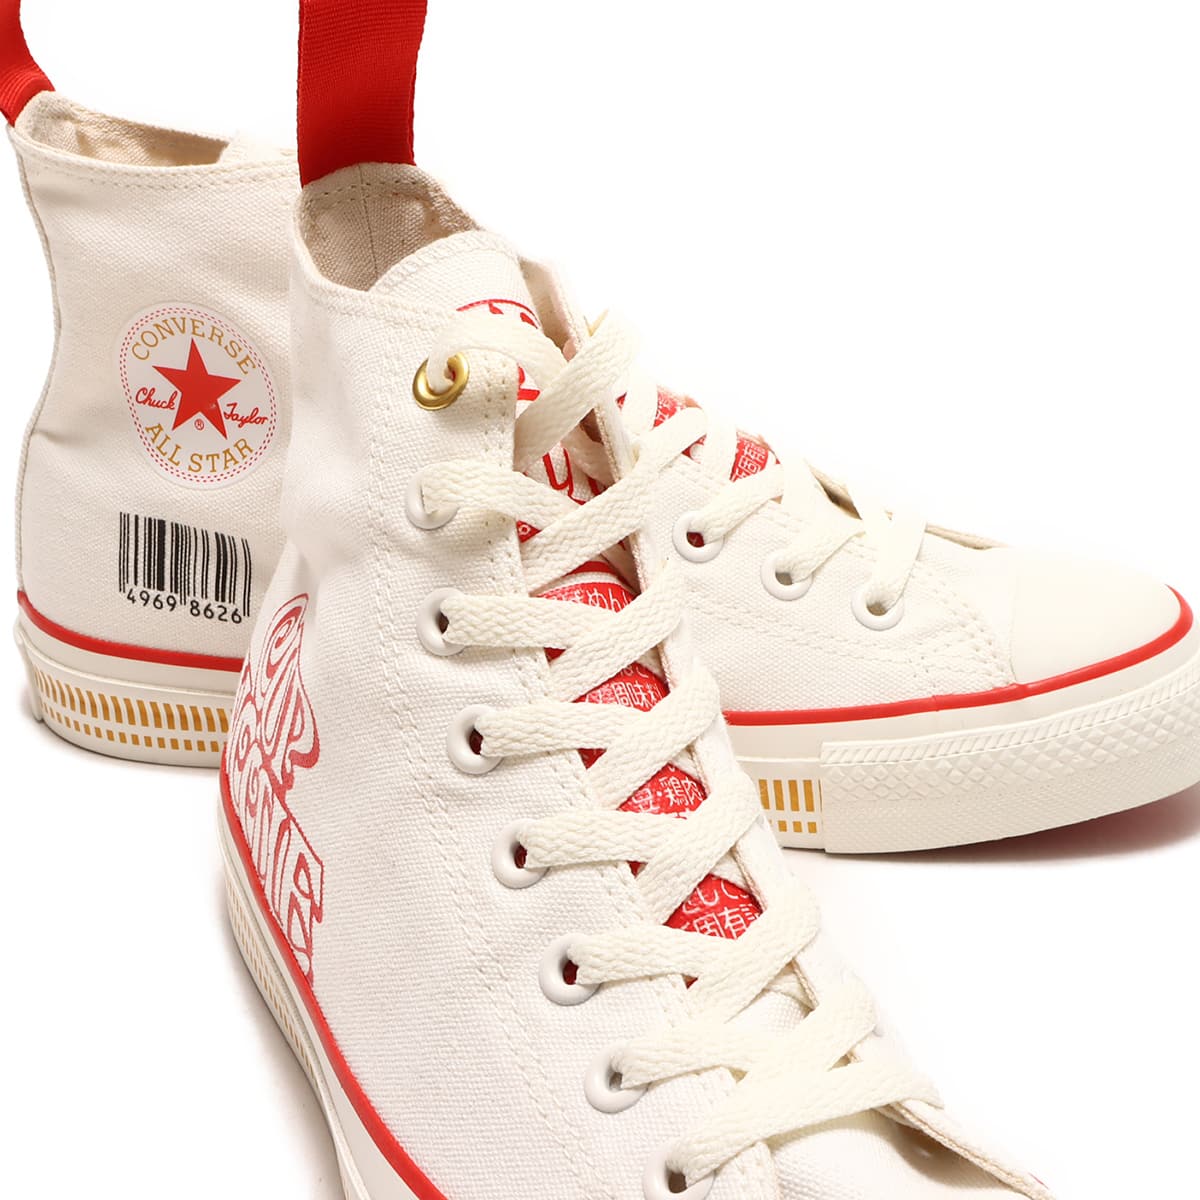 CONVERSE ALL STAR R CUPNOODLE HI RED 23SS-I